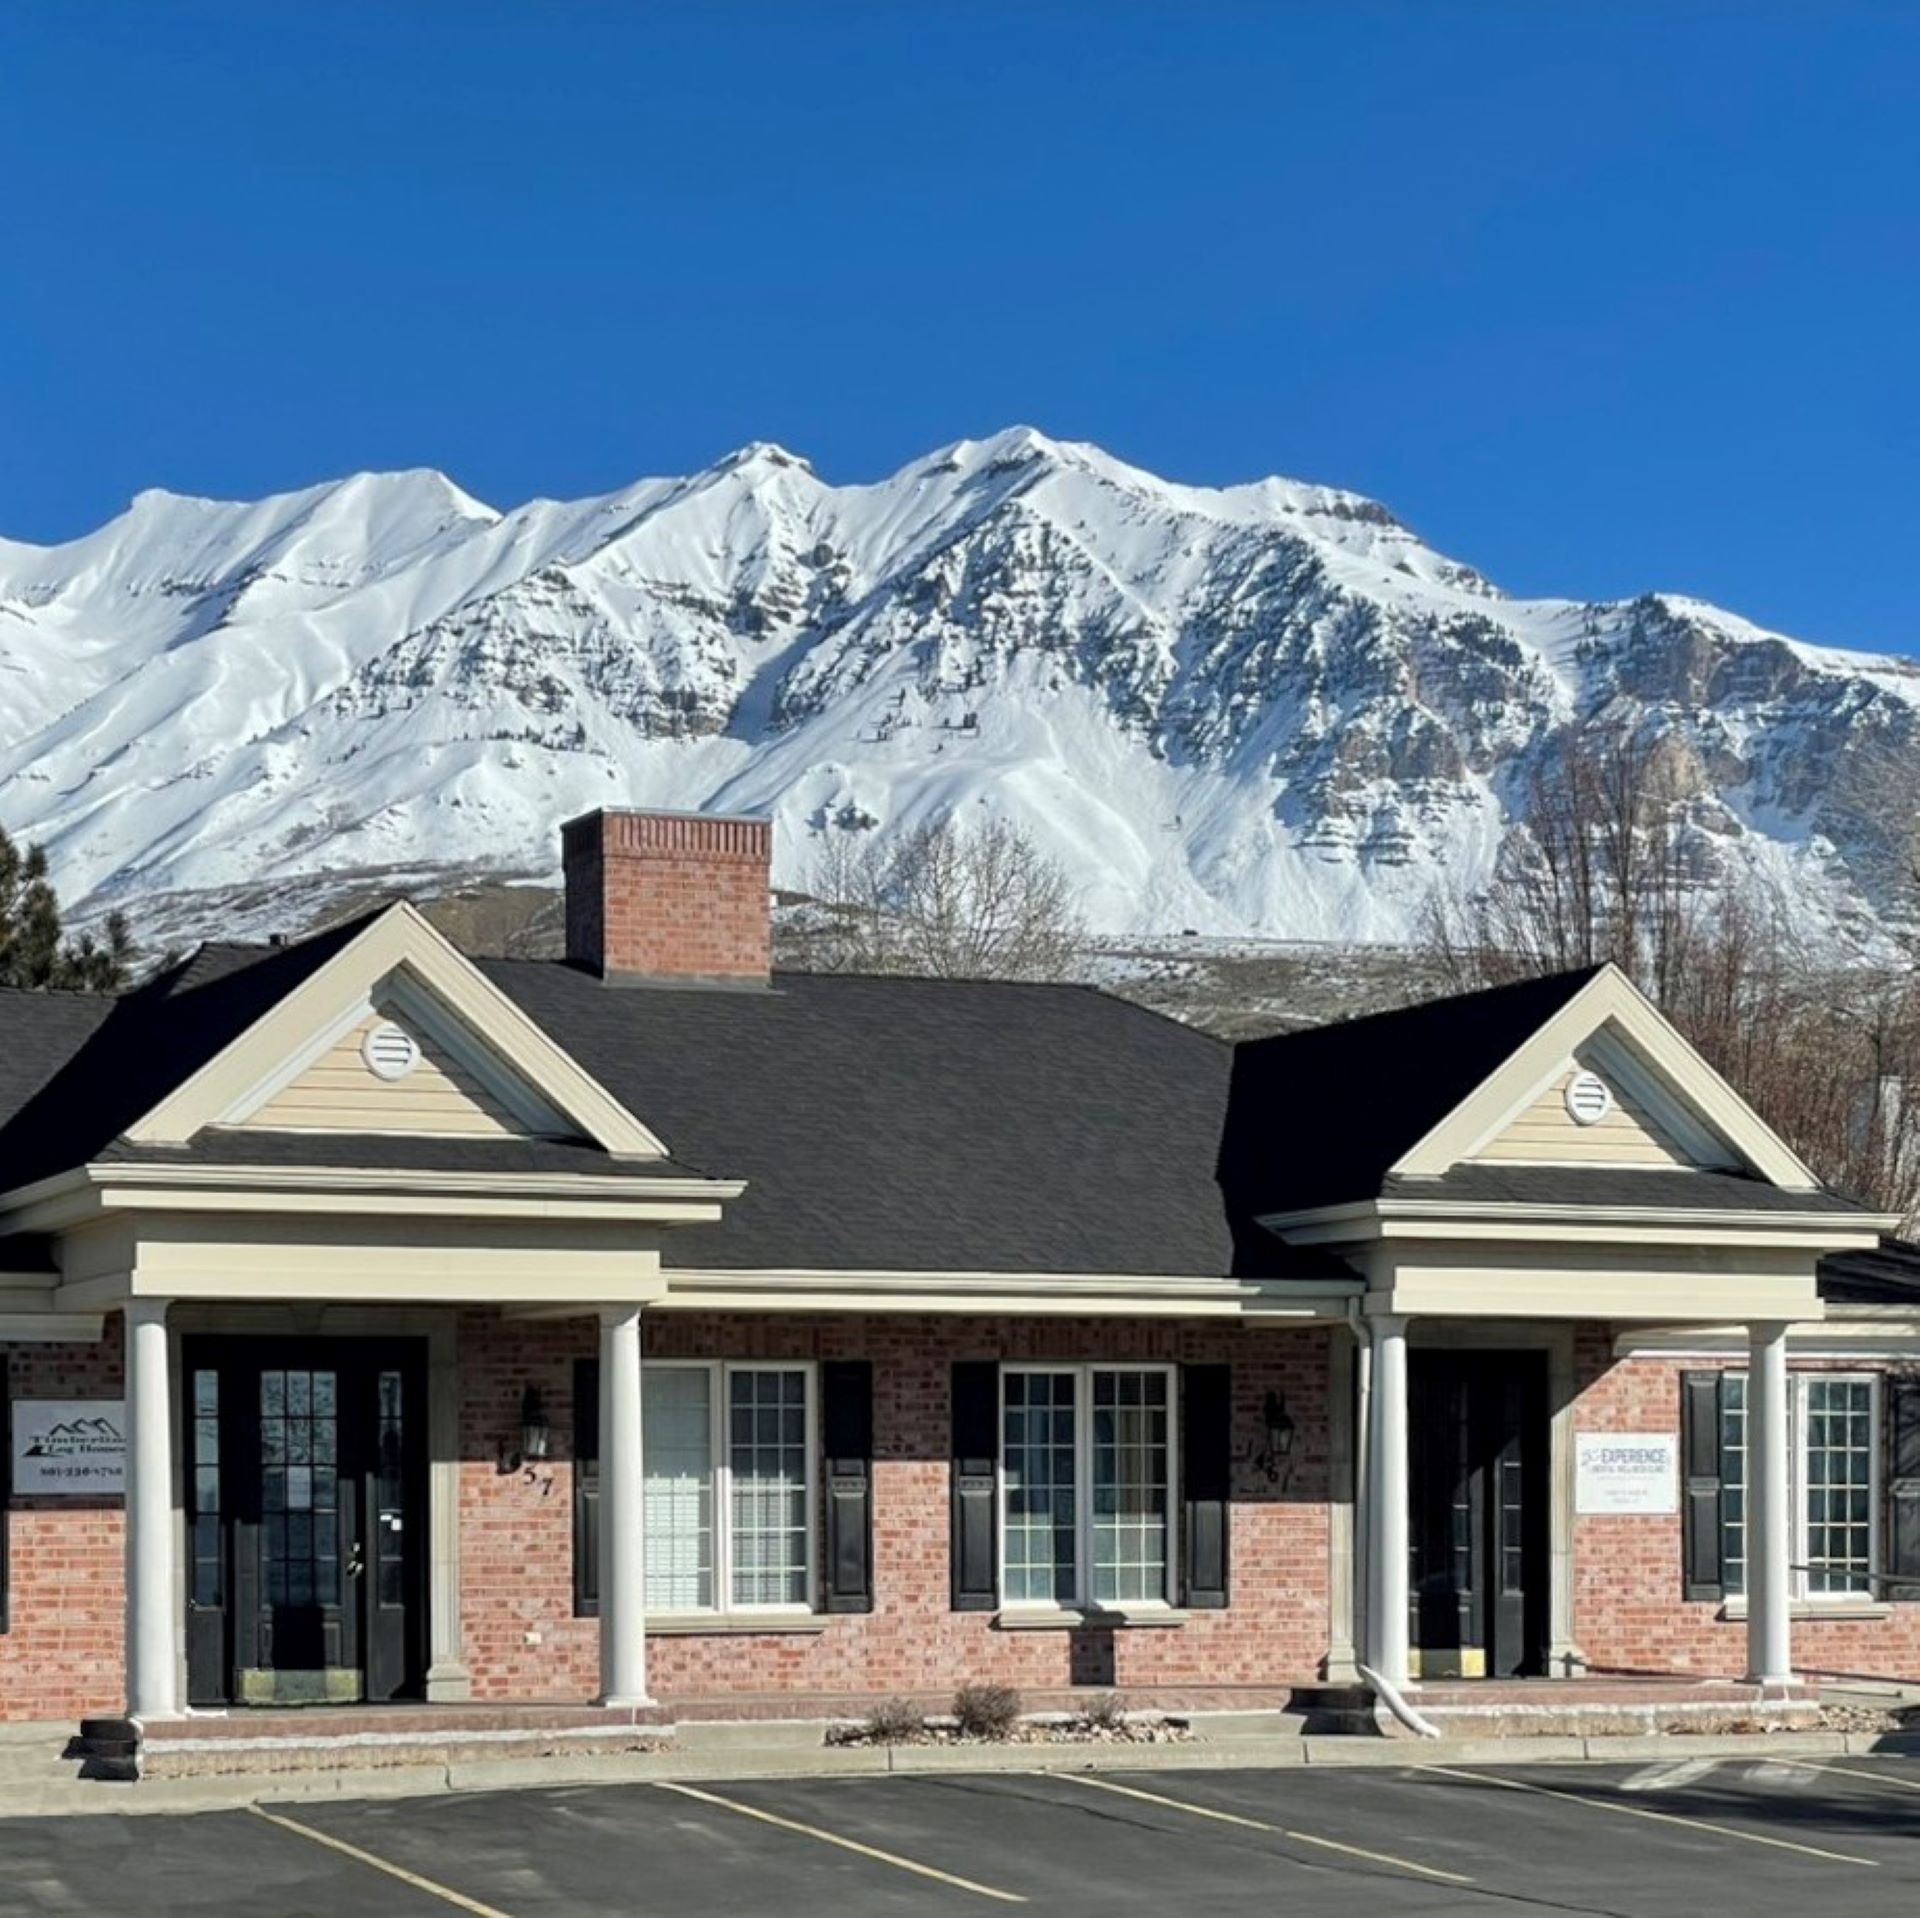 Orem office with the Wasatch Mountain Range in the background